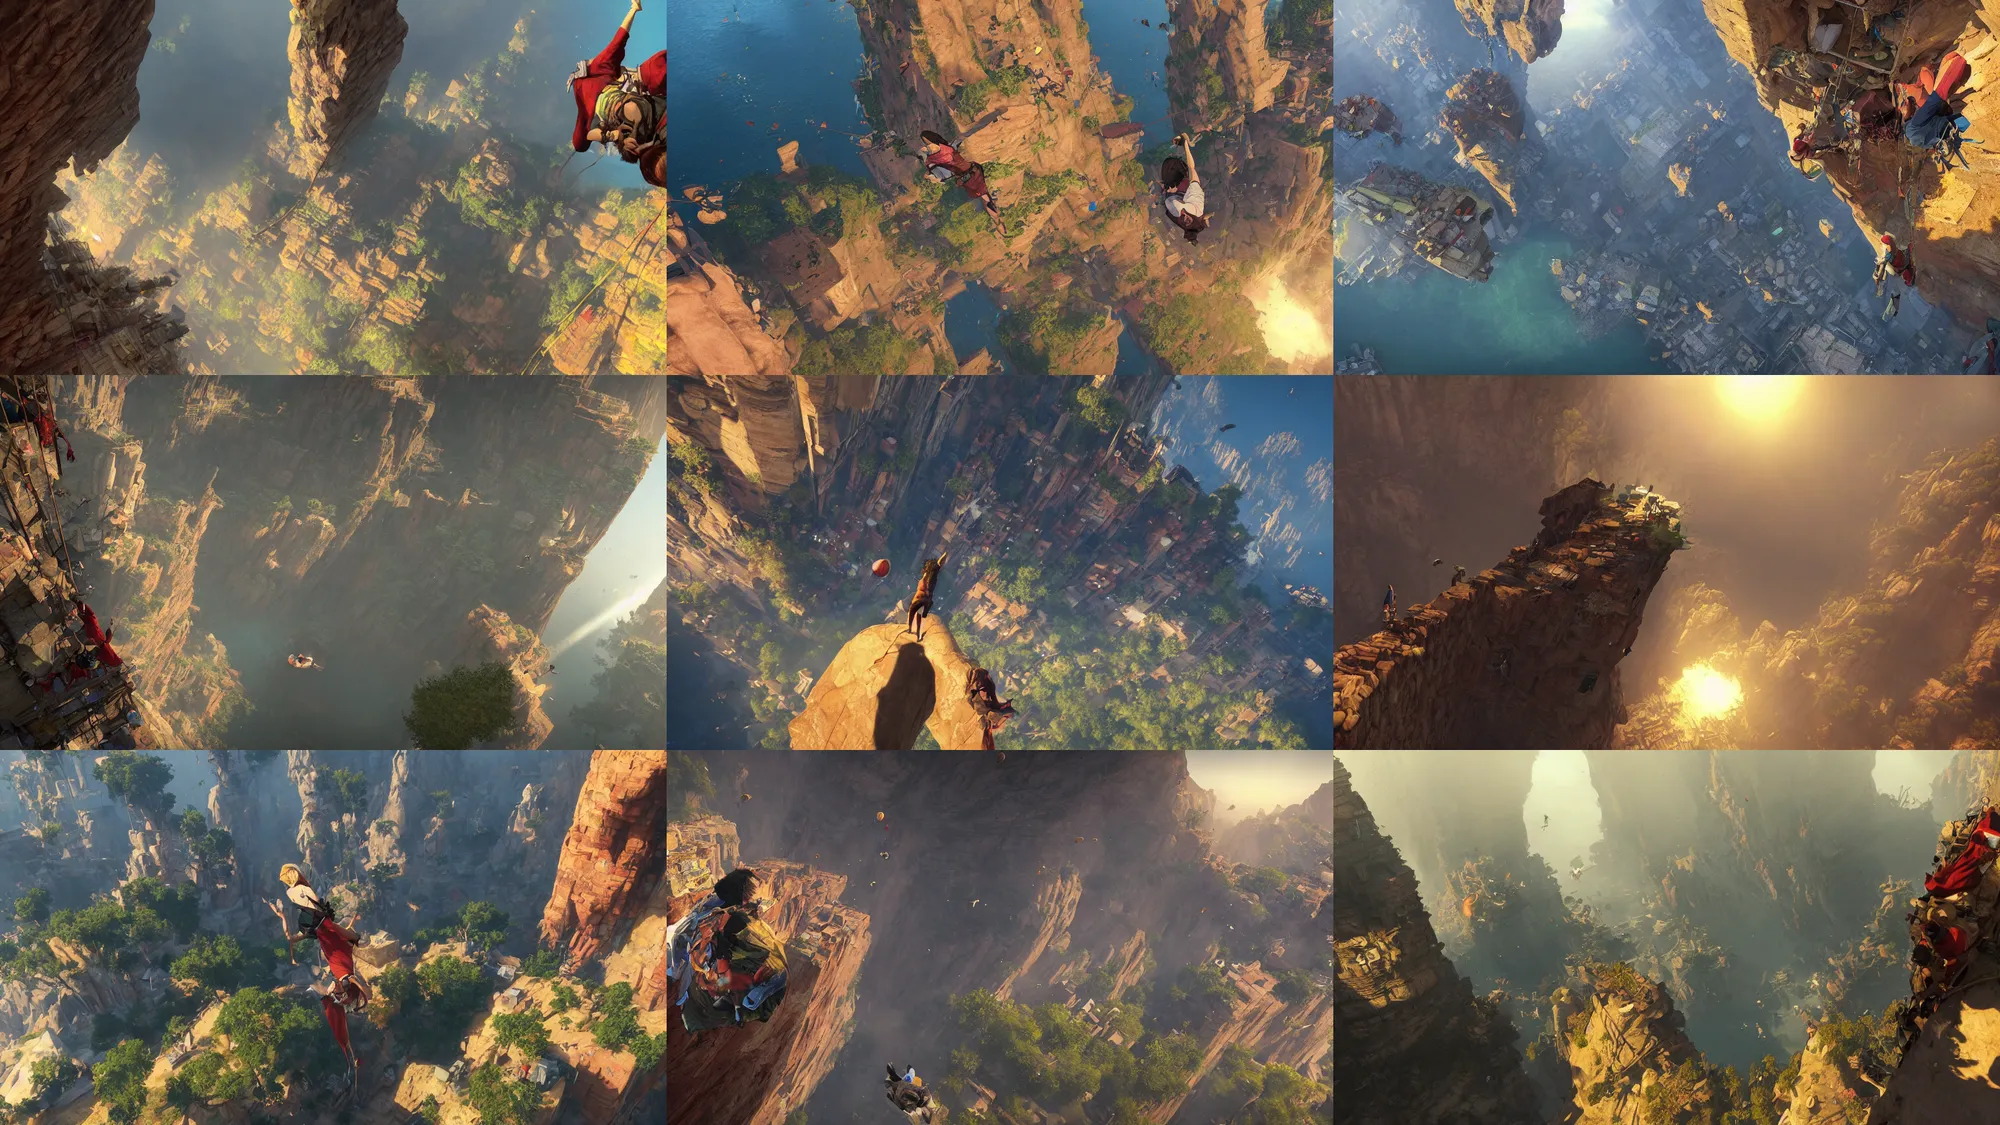 Prompt: incredible screenshot of the last guardian, gravity rush, on PS5, Unreal engine 5, golden hour, colorful cliff-face village, large red banners fabric in the wind, dust storm, dynamic camera angle, deep 3 point perspective, fish eye, dynamic extreme foreshortening, rock climbing, scaffolding collapsing, vertigo, fear of heights, contrasting shadows, valley mist, huge chasm, broken bridges, 8k, hd, high resolution